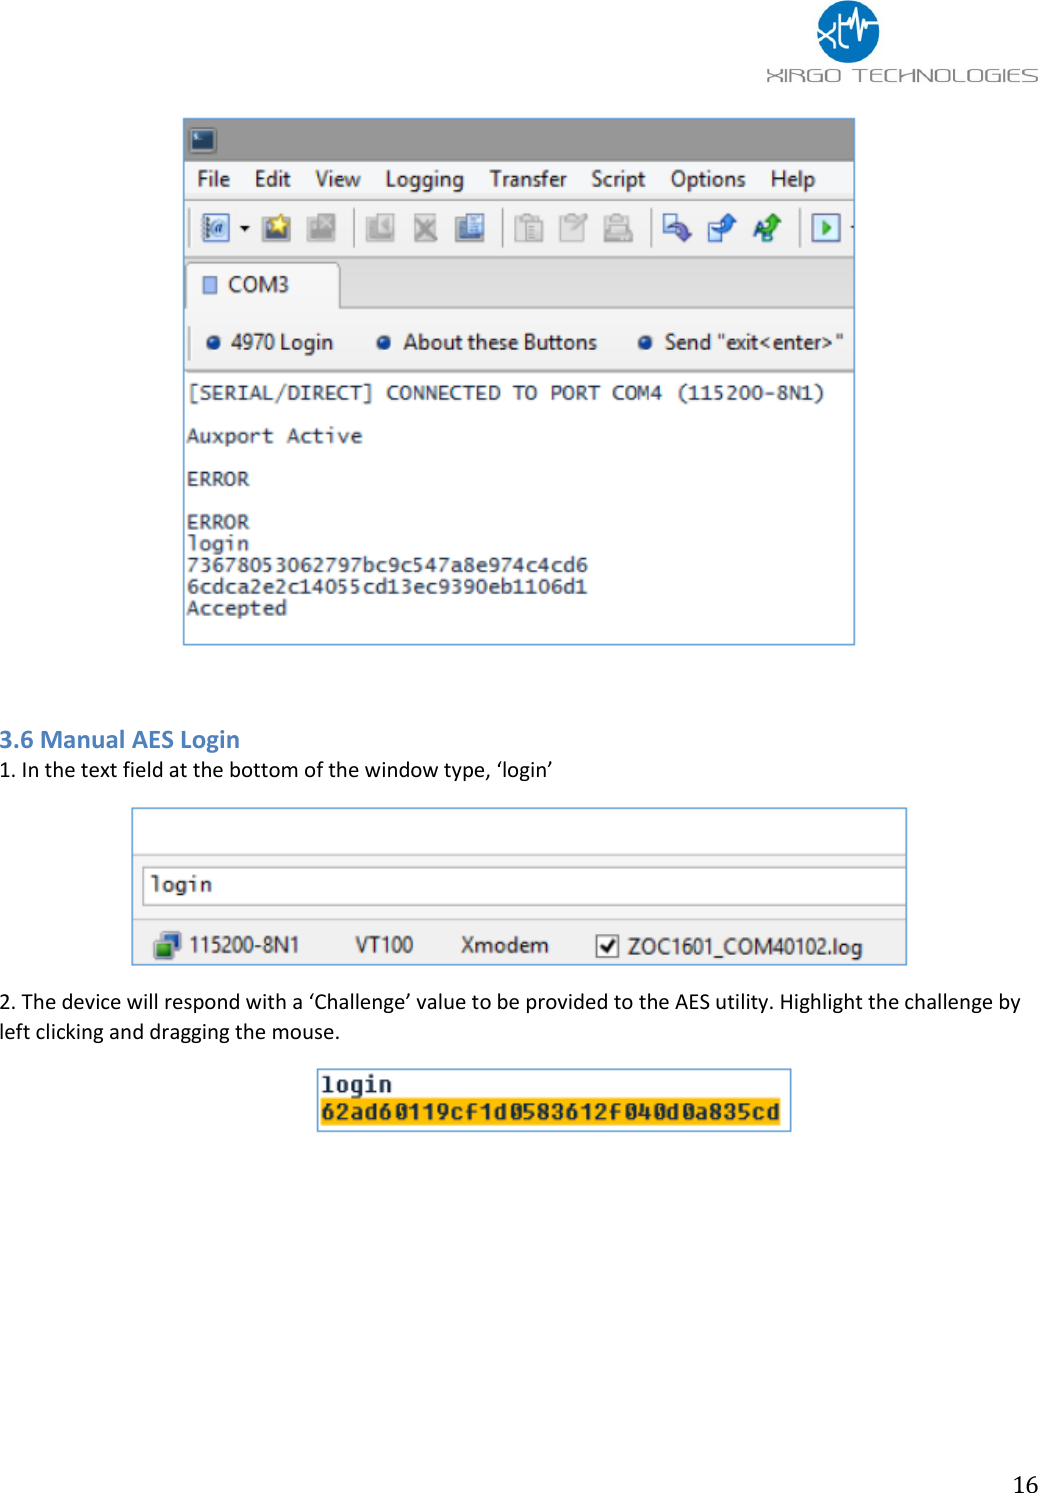                 16   3.6 Manual AES Login  1. In the text field at the bottom of the window type, ‘login’   2. The device will respond with a ‘Challenge’ value to be provided to the AES utility. Highlight the challenge by left clicking and dragging the mouse.         